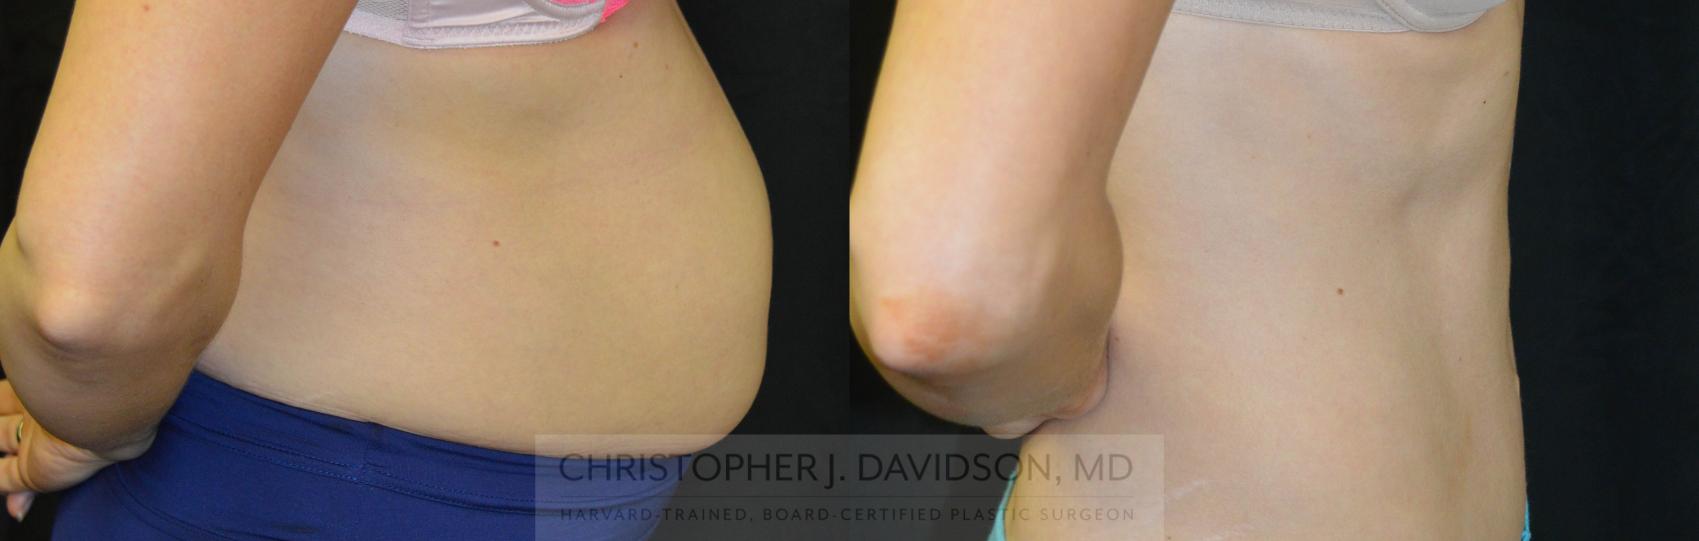 Tummy Tuck (Abdominoplasty) Case 40 Before & After View #2 | Wellesley, MA | Christopher J. Davidson, MD